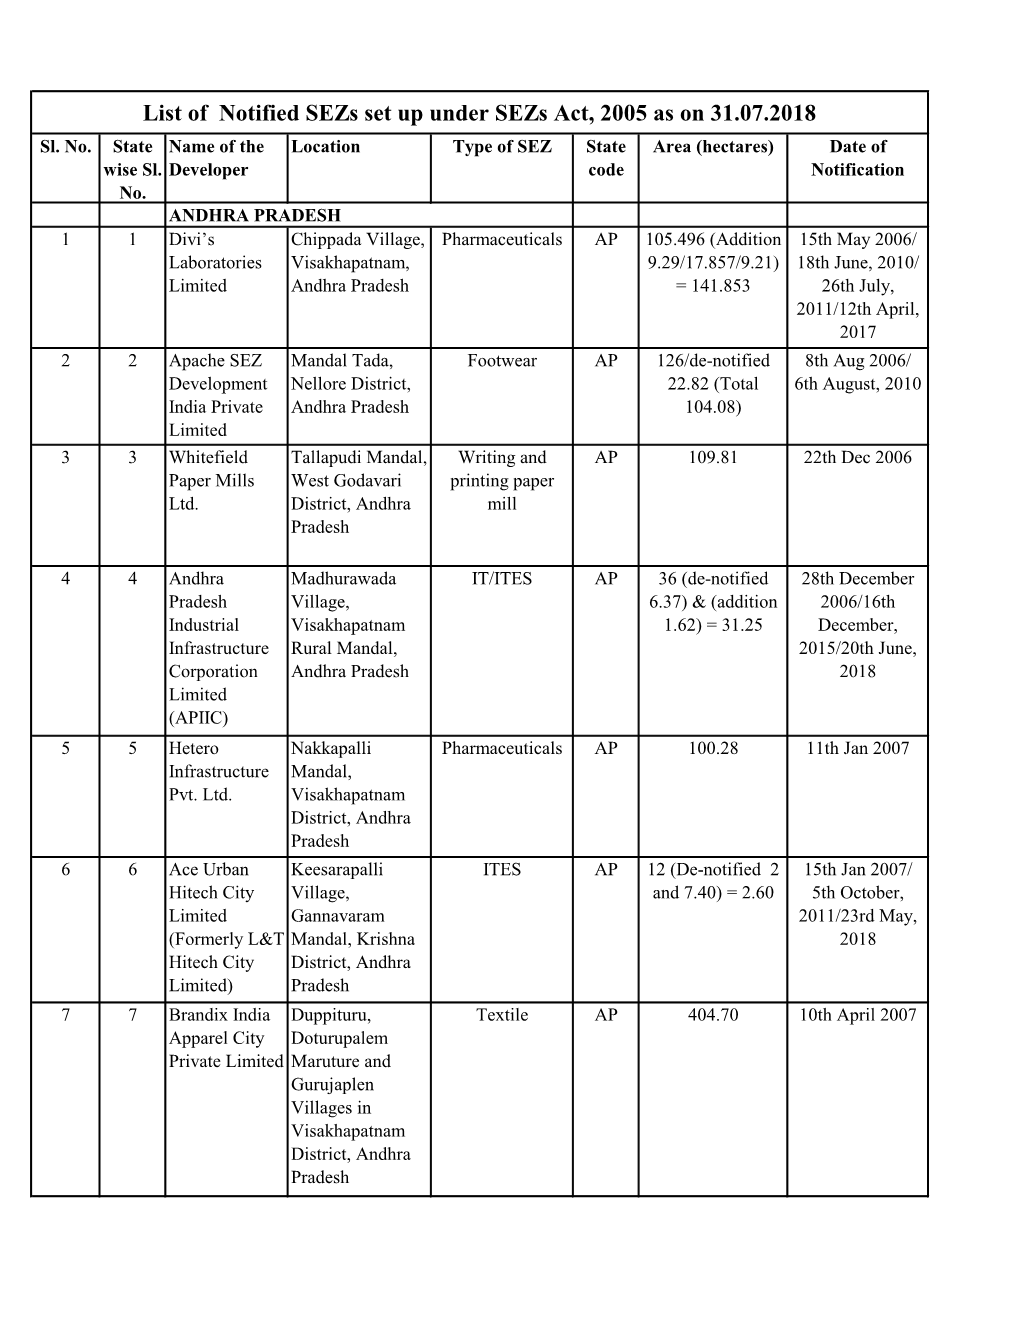 List of Notified Sezs Set up Under Sezs Act, 2005 As on 31.07.2018 Sl